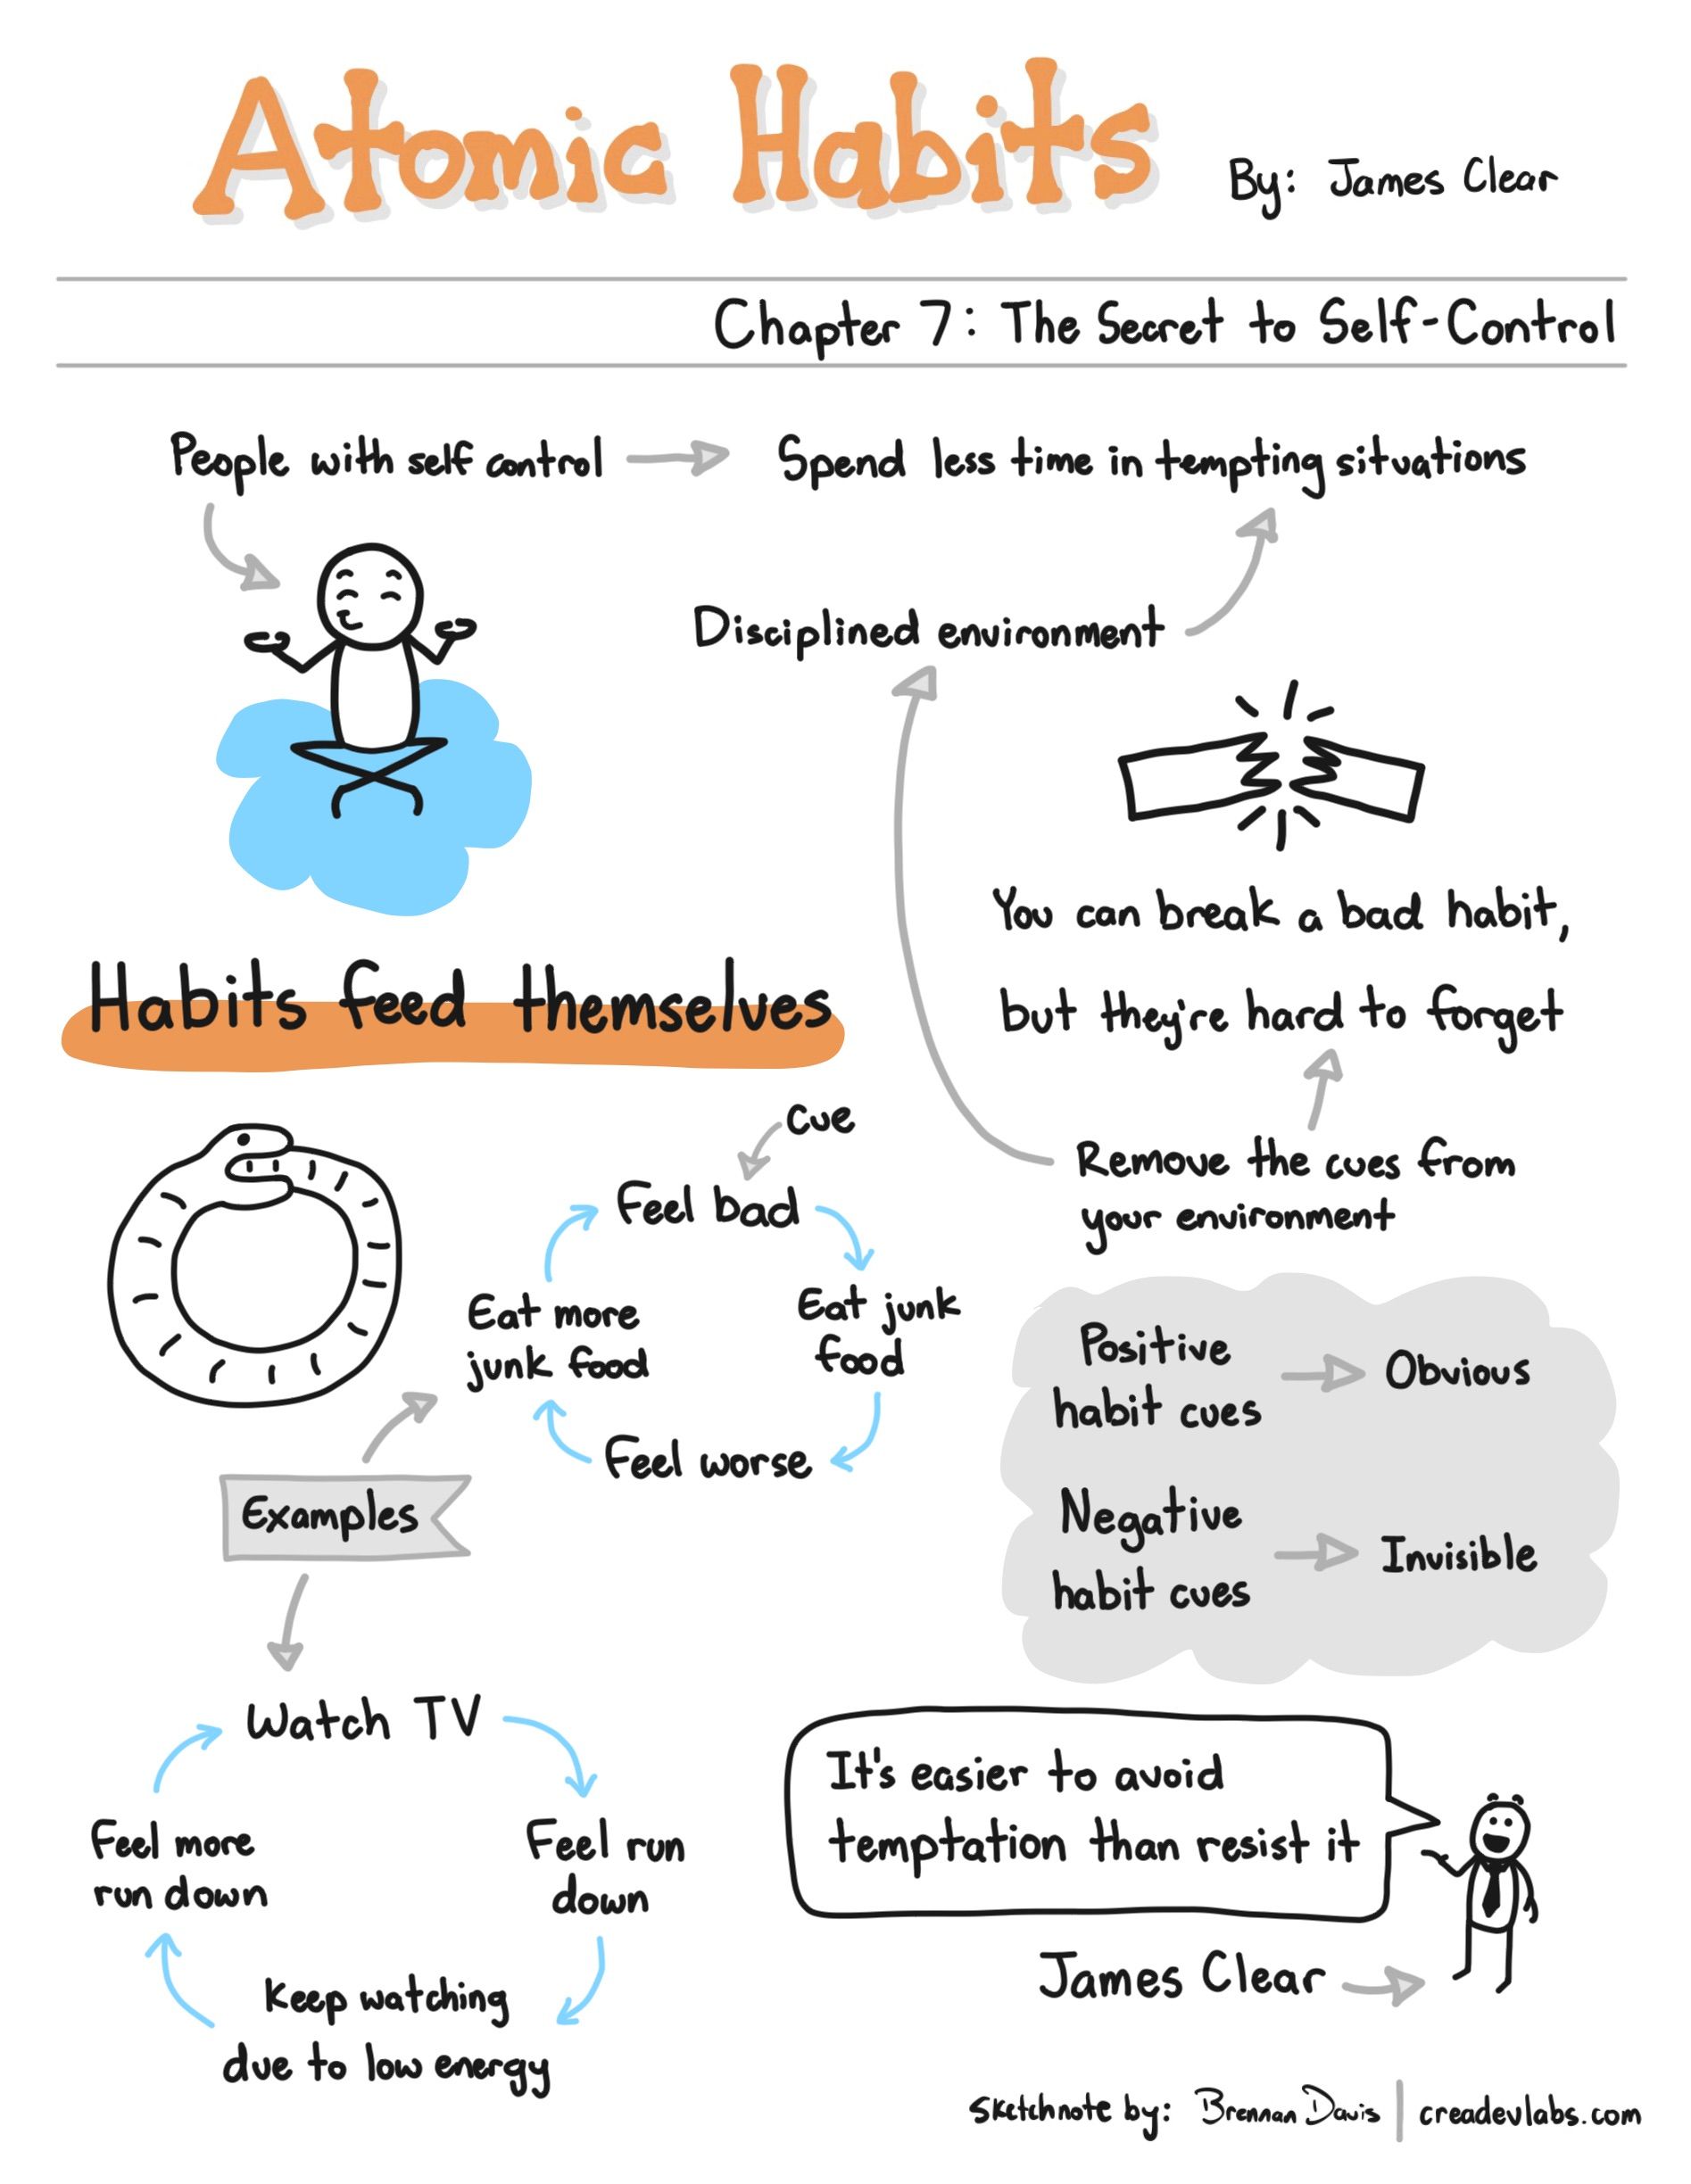 A Visual Book Summary of Atomic Habits by James Clear